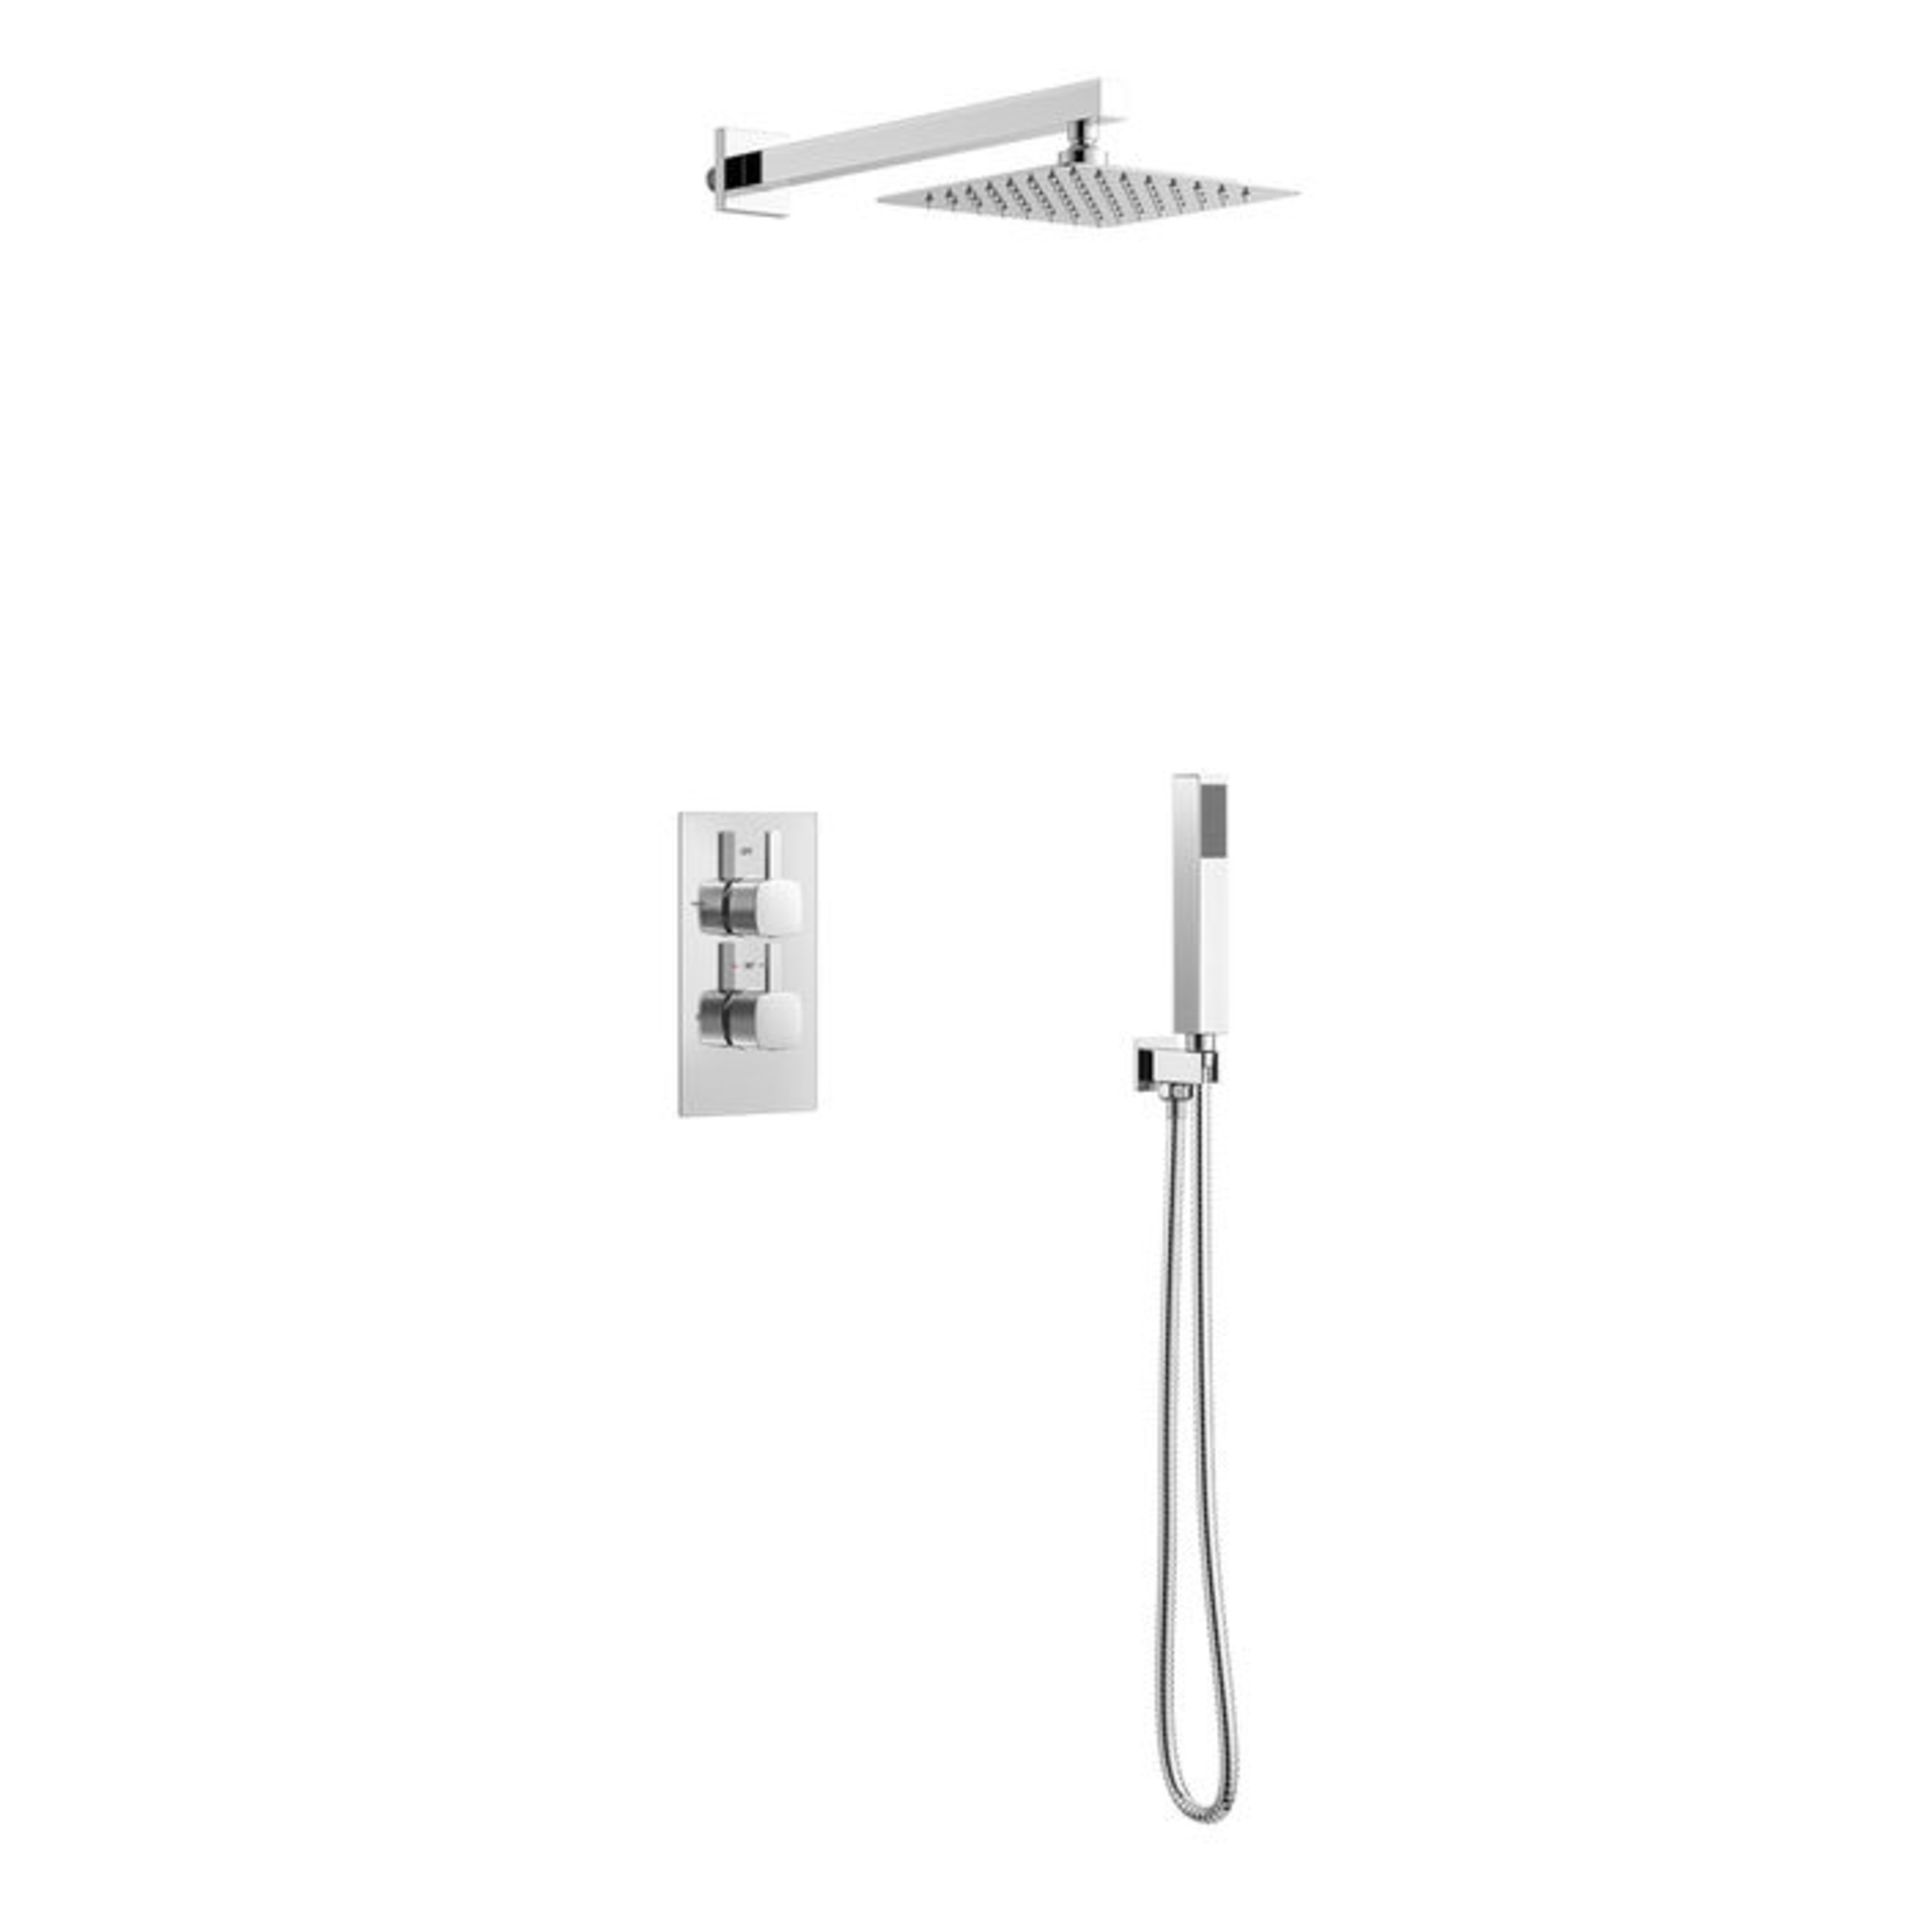 (O53) Square Concealed Thermostatic Mixer Shower Kit & Medium Head. Family friendly detachable - Image 3 of 5